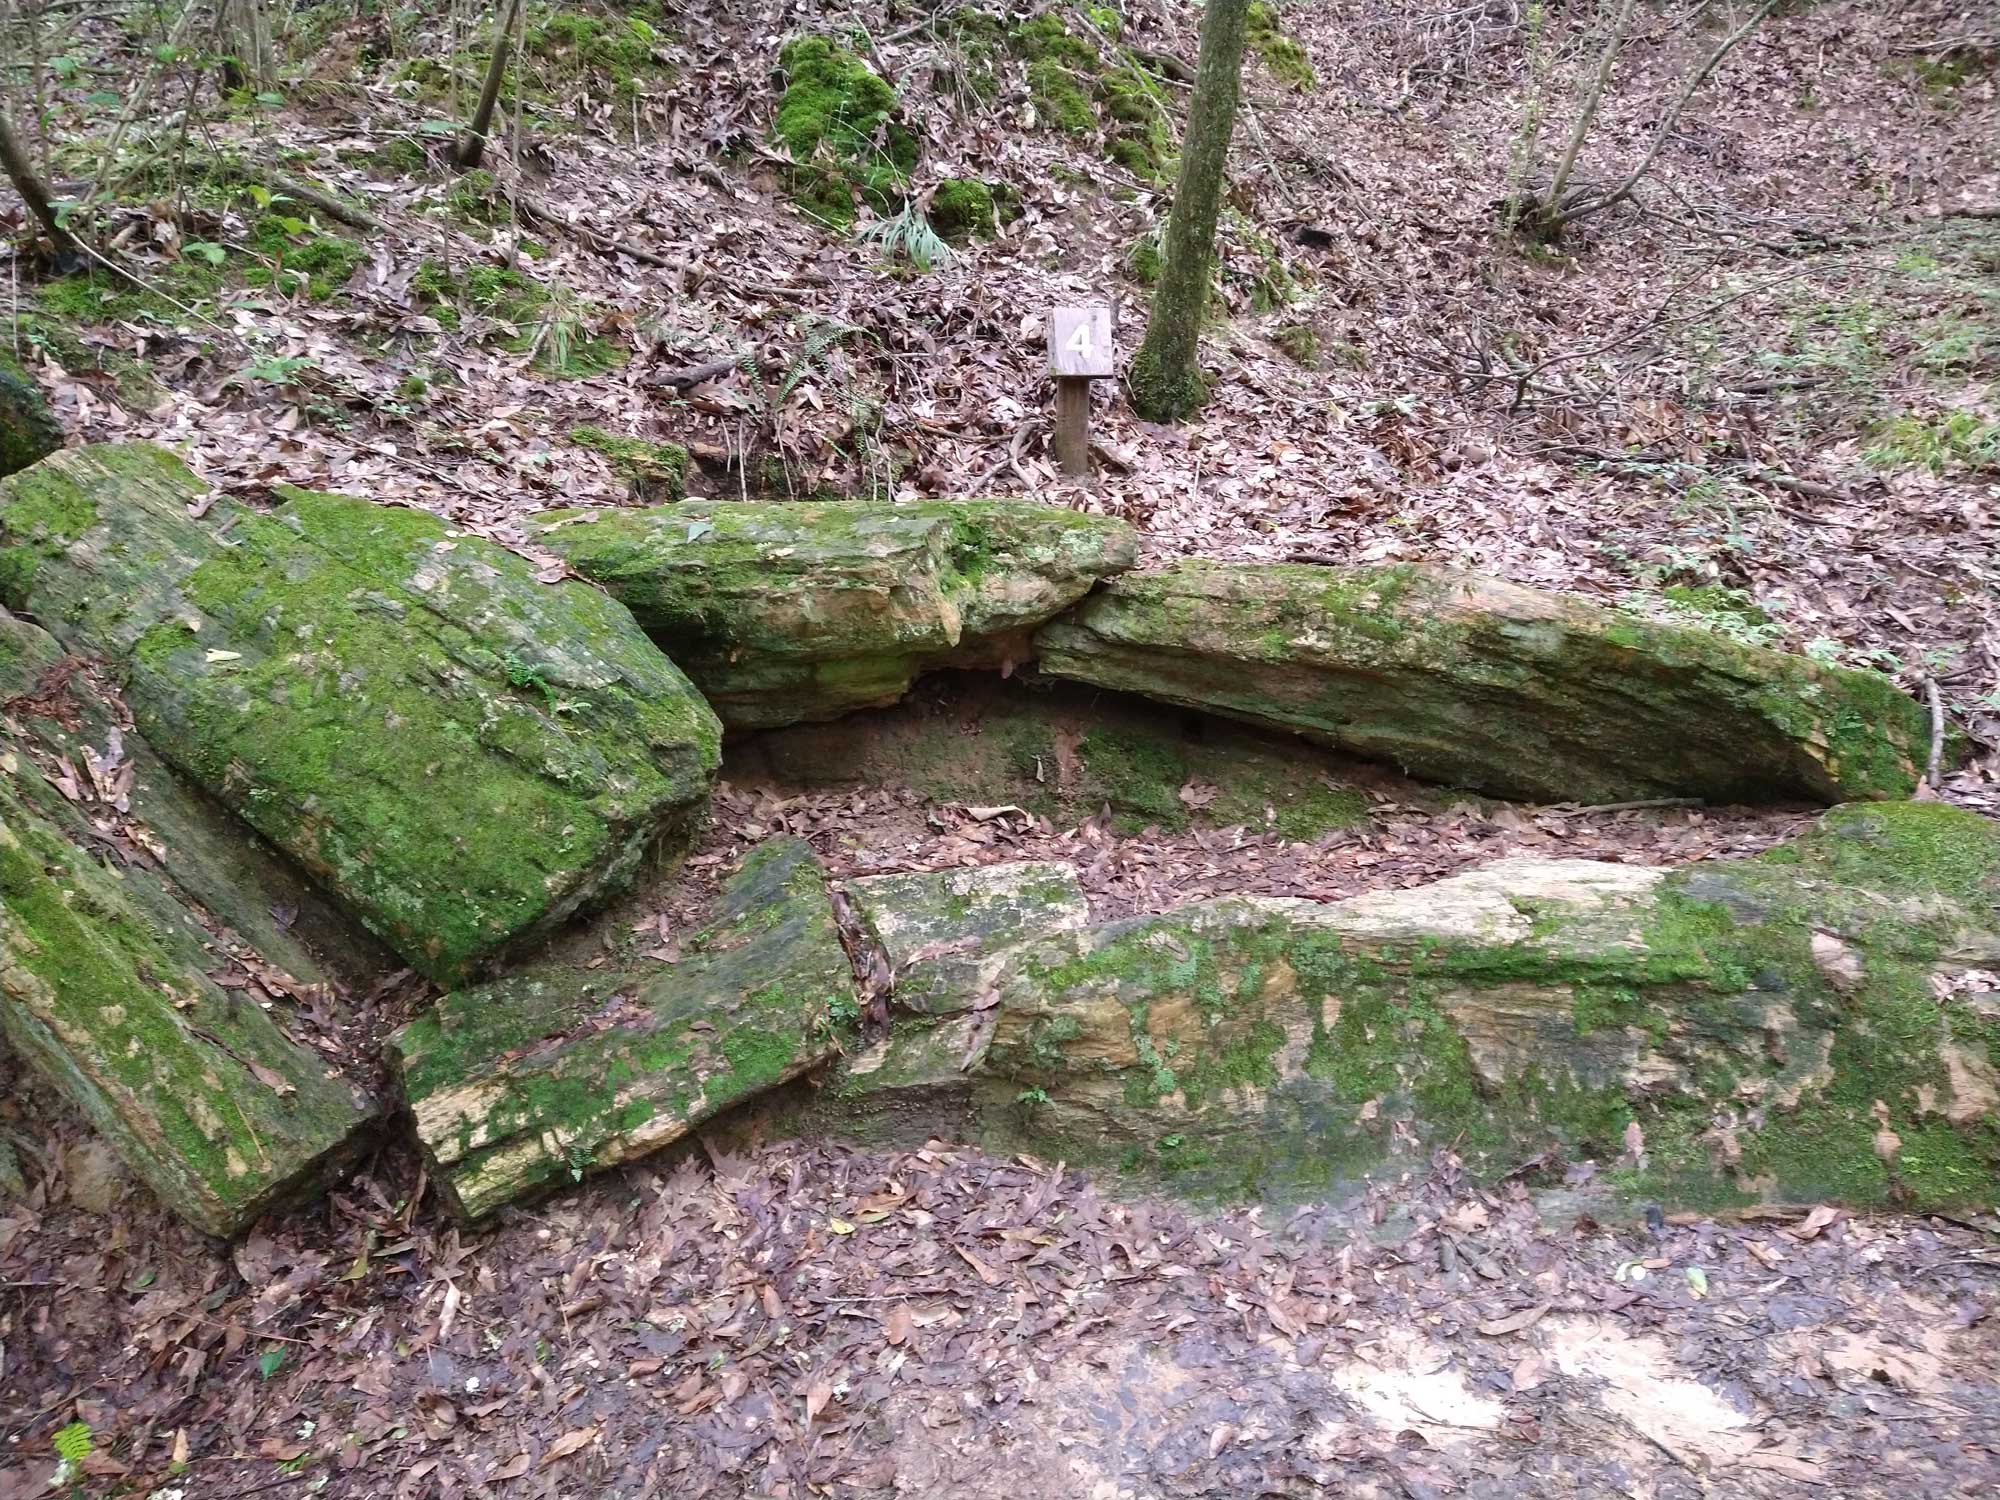 Photograph of a large petrified log covered with moss at a Paleogene petrified forest in Mississippi.